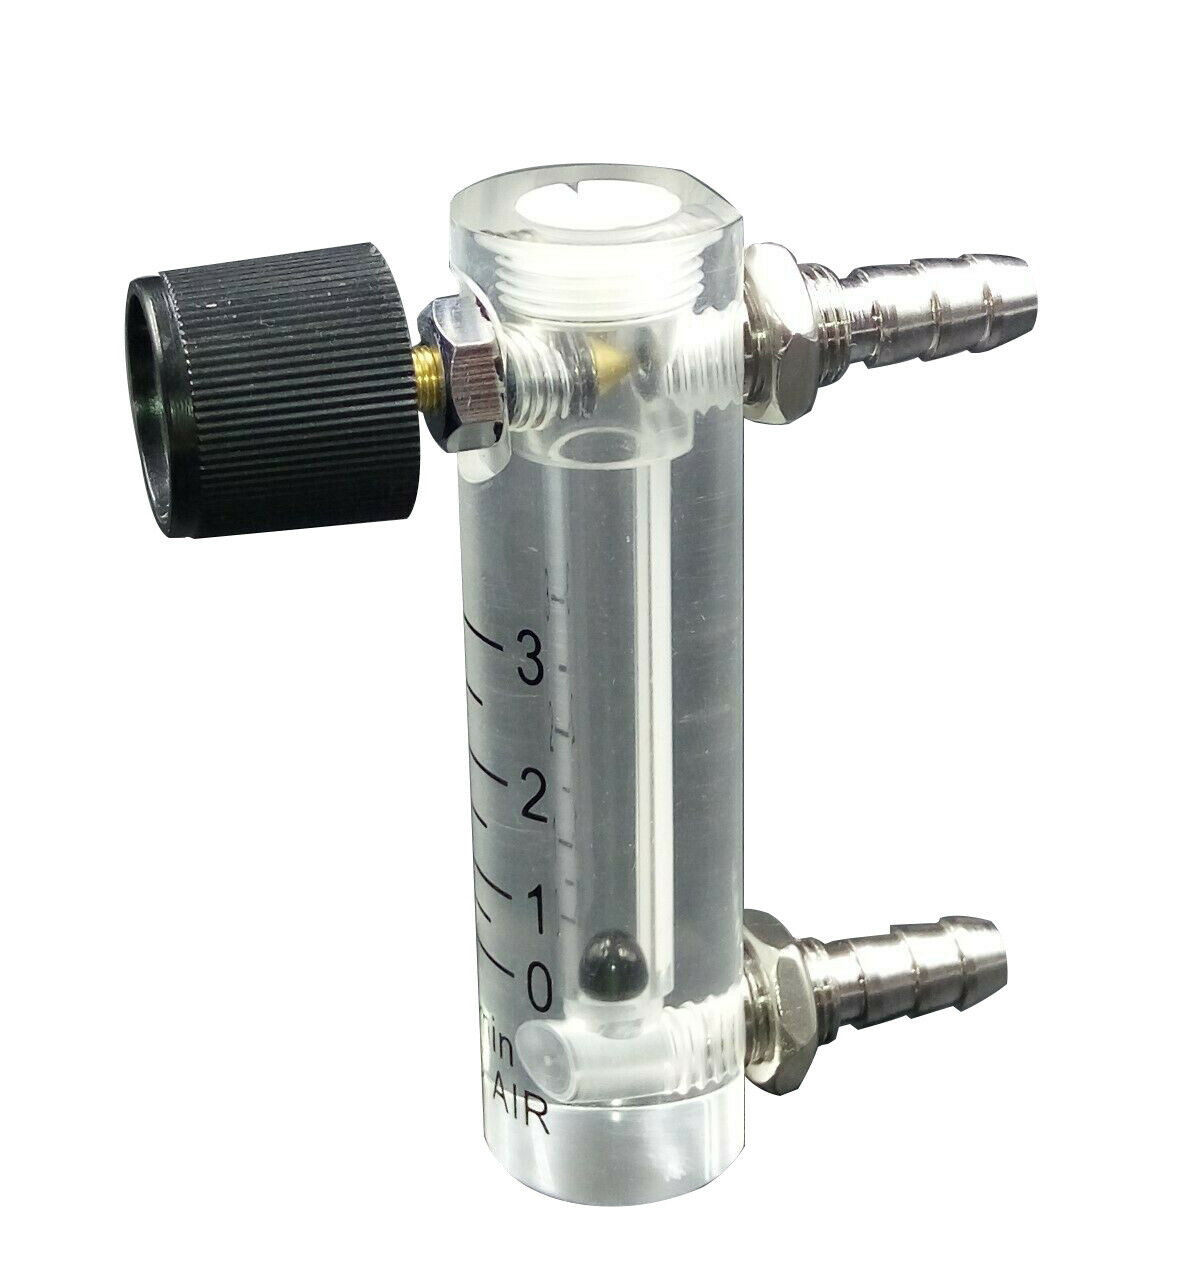 Lzq-2, 0-3lpm Oxygen Flow Meter With Control Valve For Oxygen Gas Conectrator